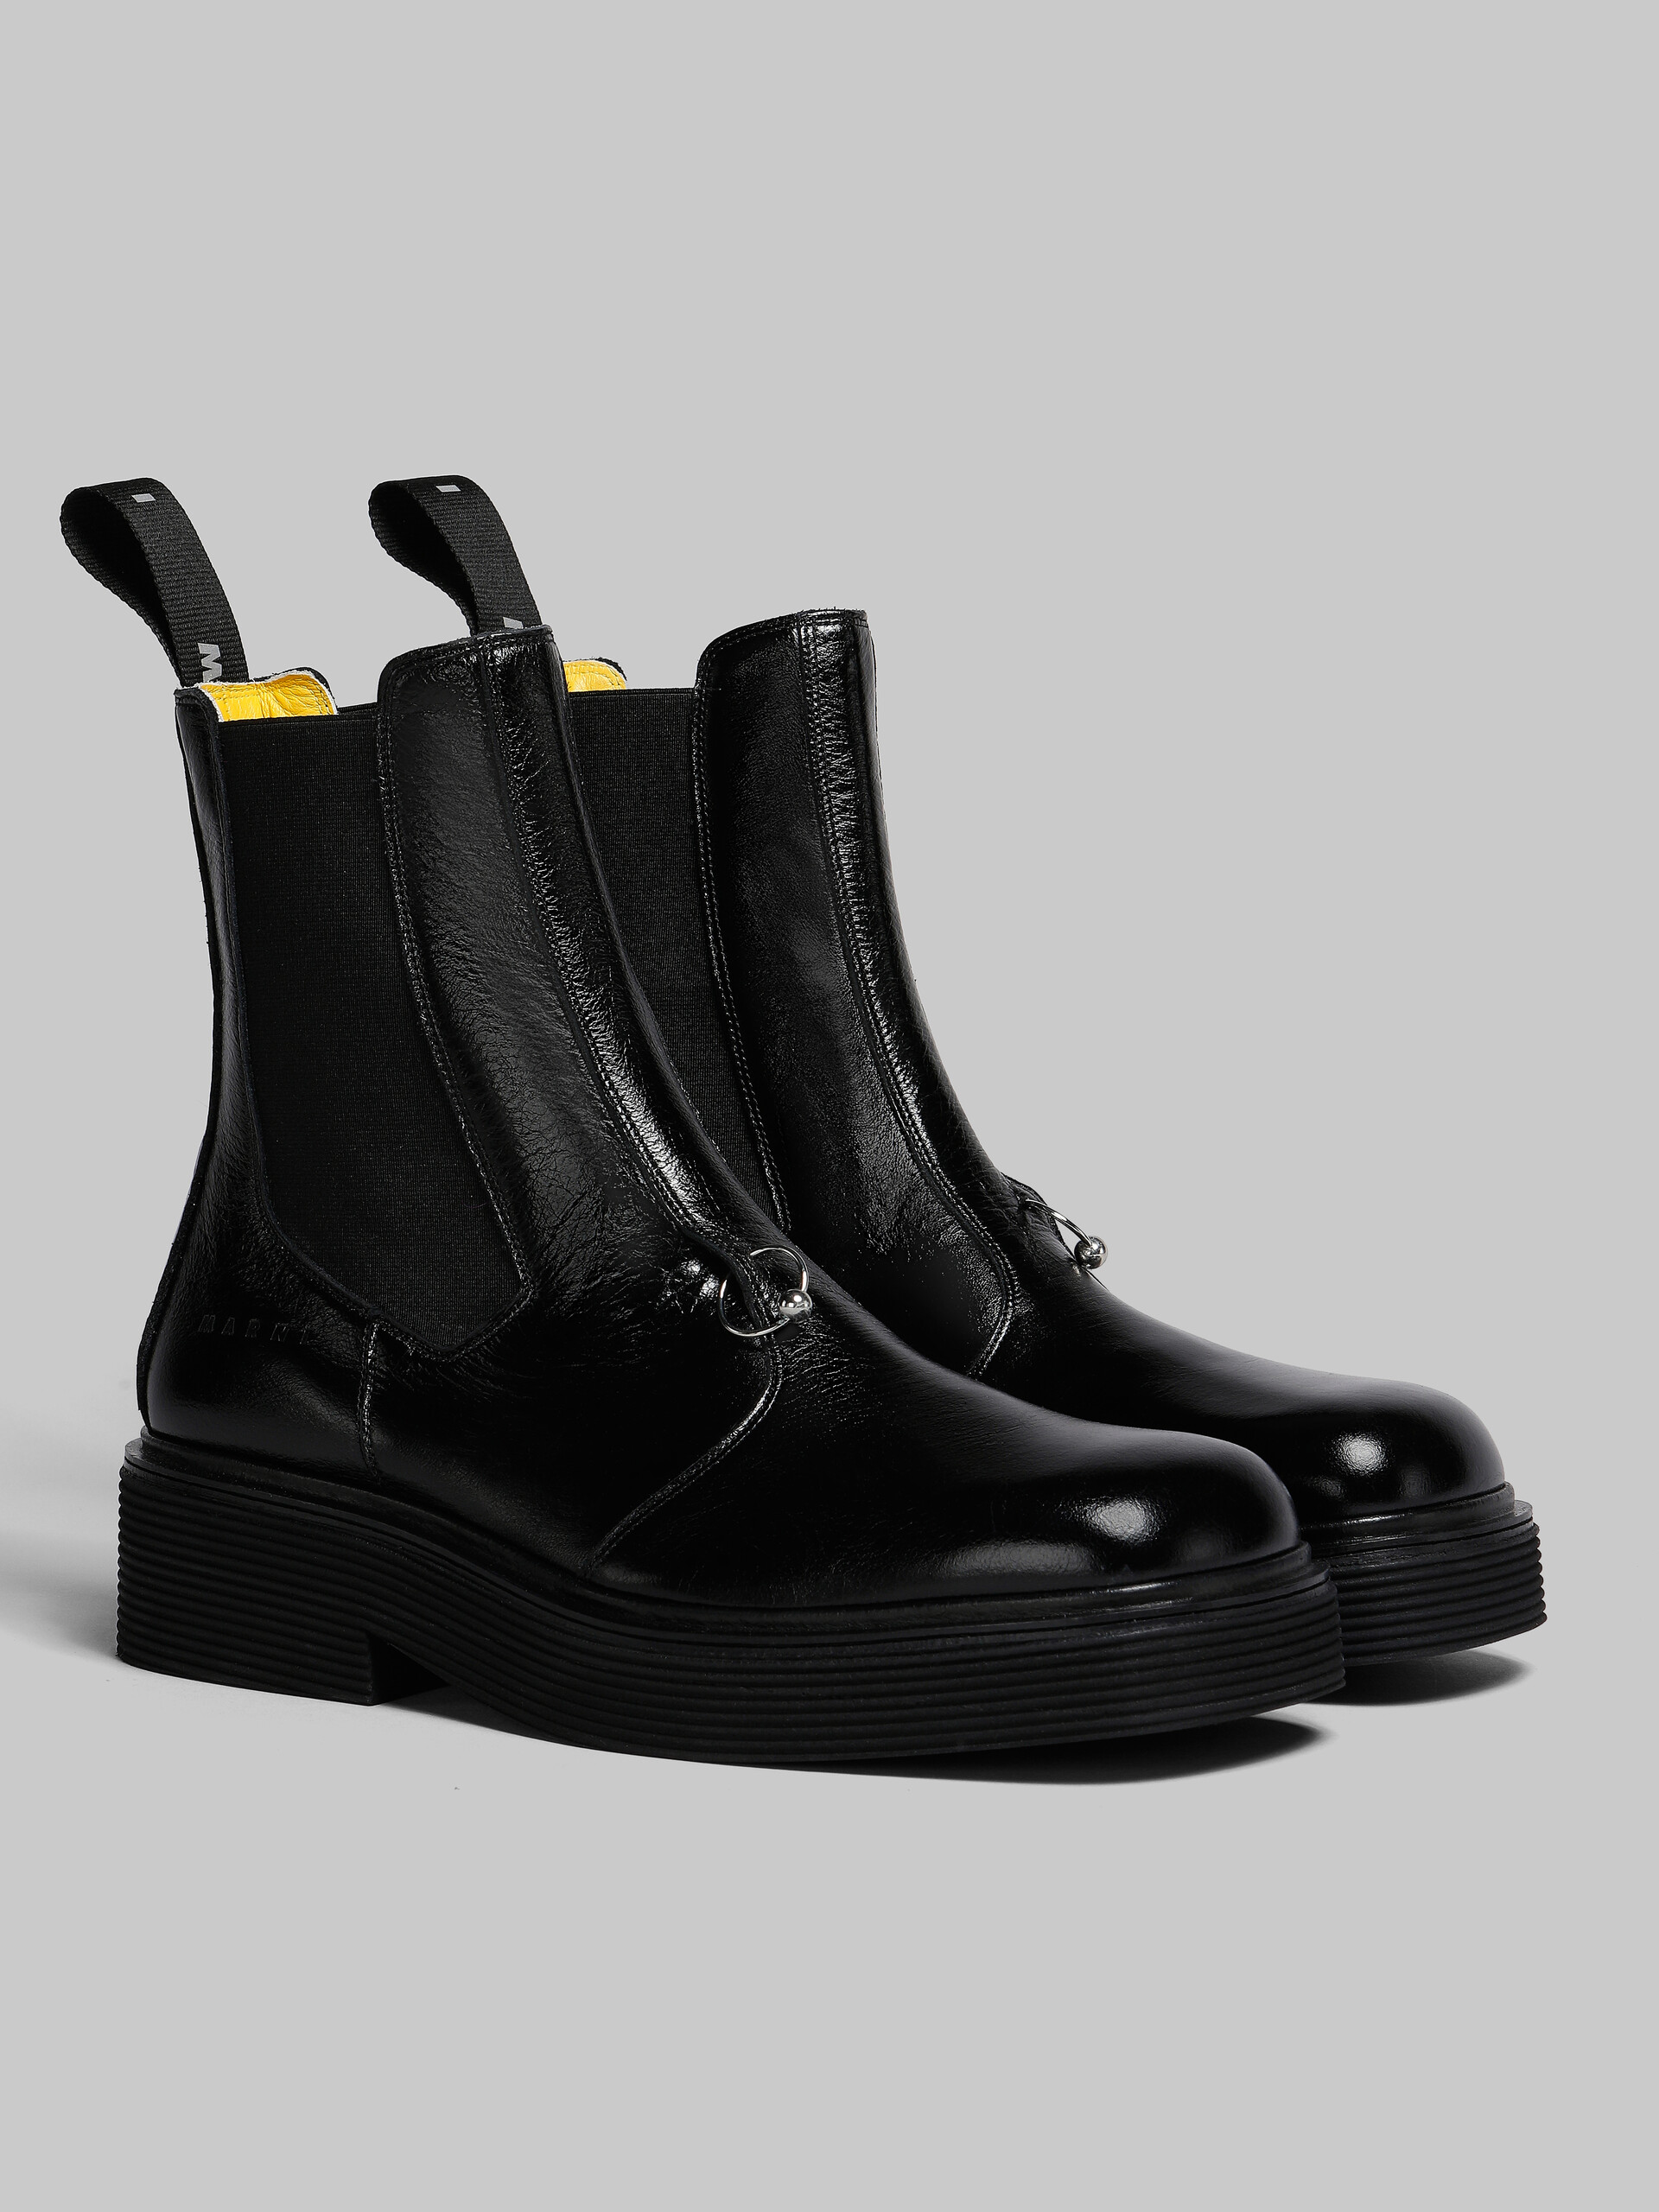 Black leather Chelsea boot - Boots - Image 2